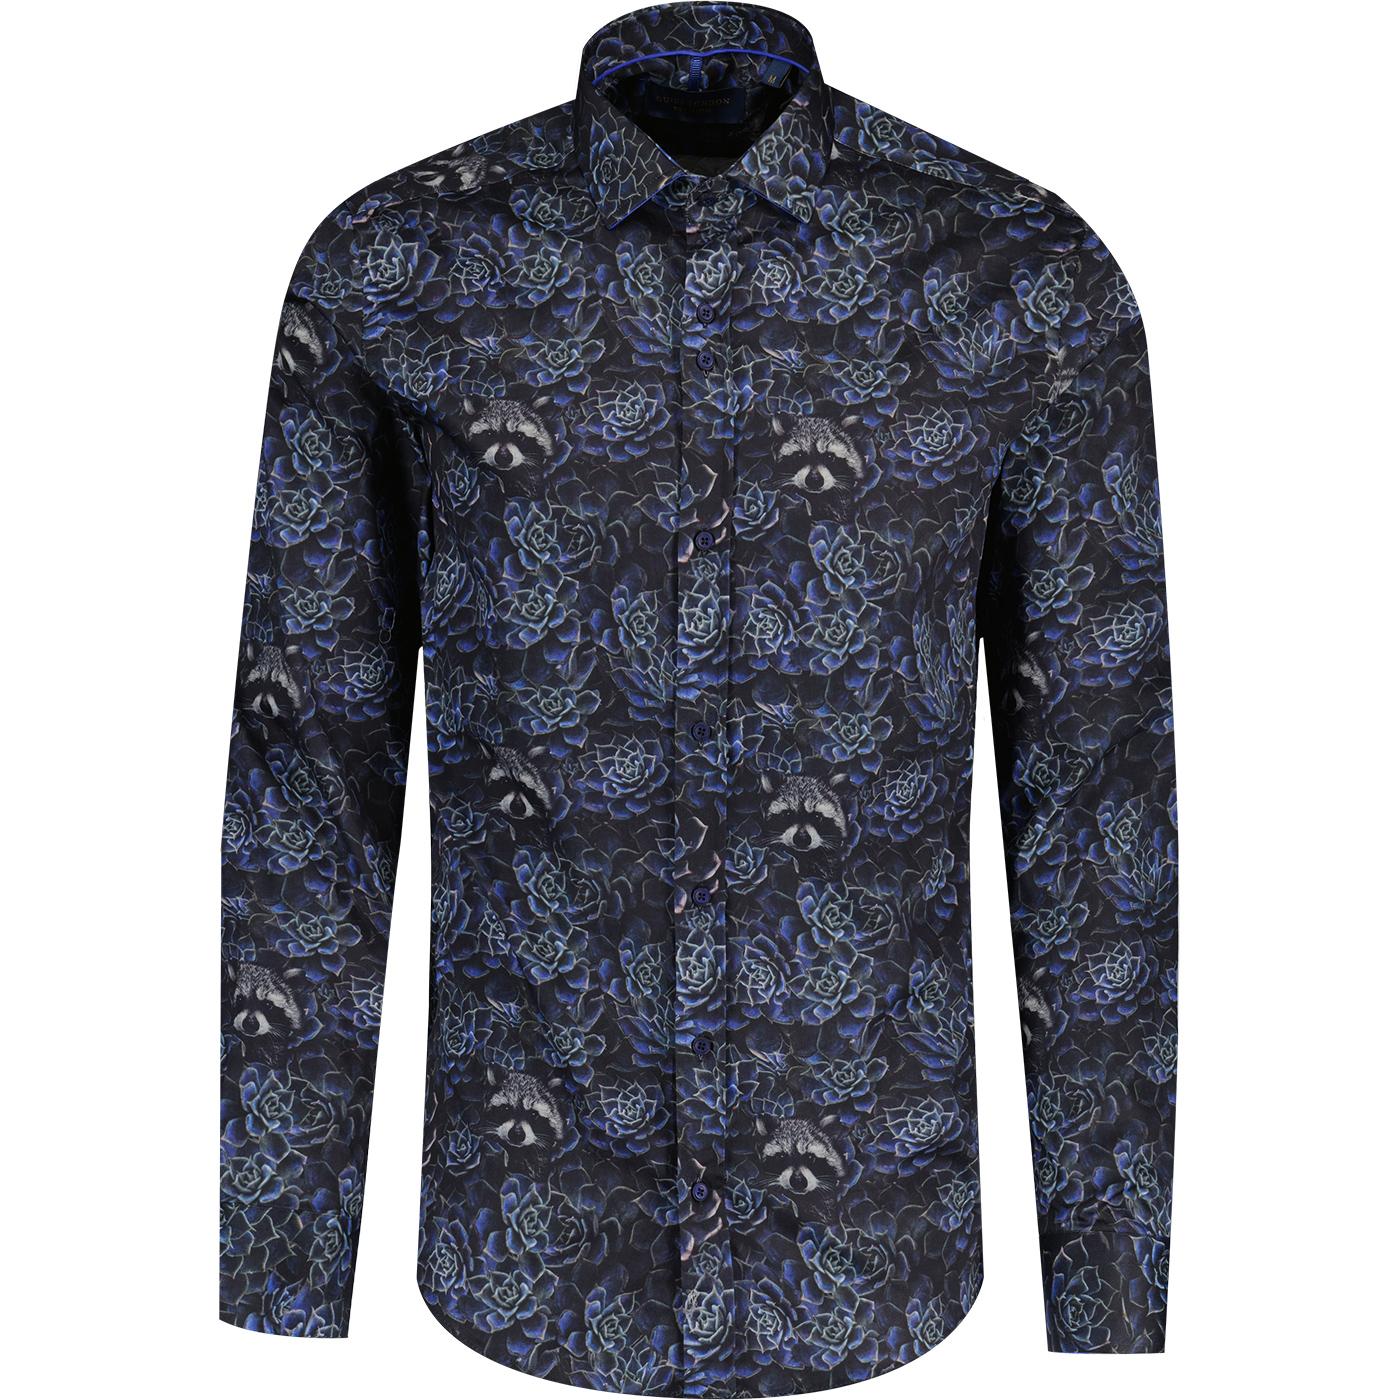 Guide London Retro Racoon Floral Print L/S Shirt in Black Navy